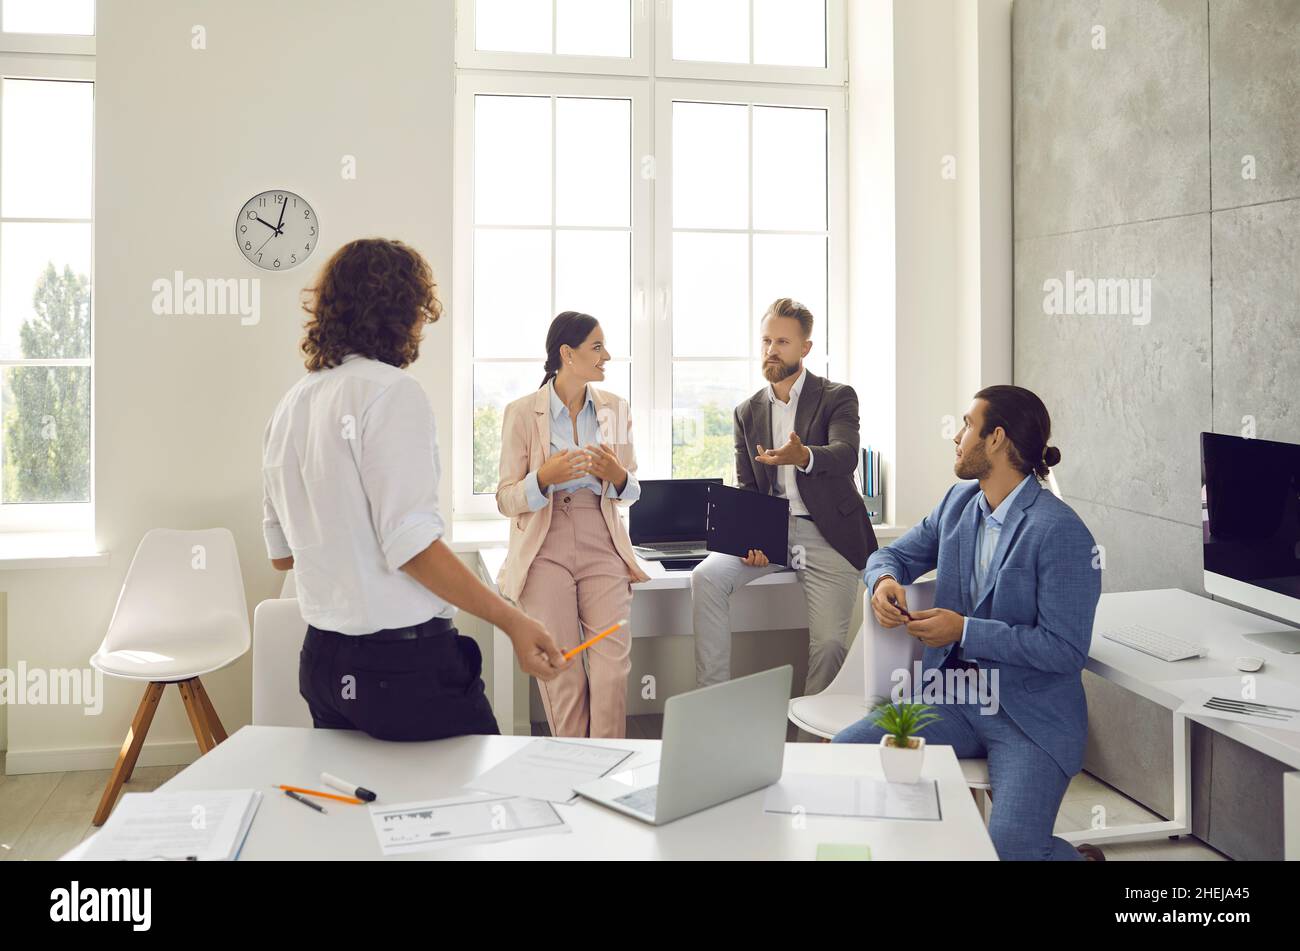 Group of employees talking about a business project they are working on together Stock Photo